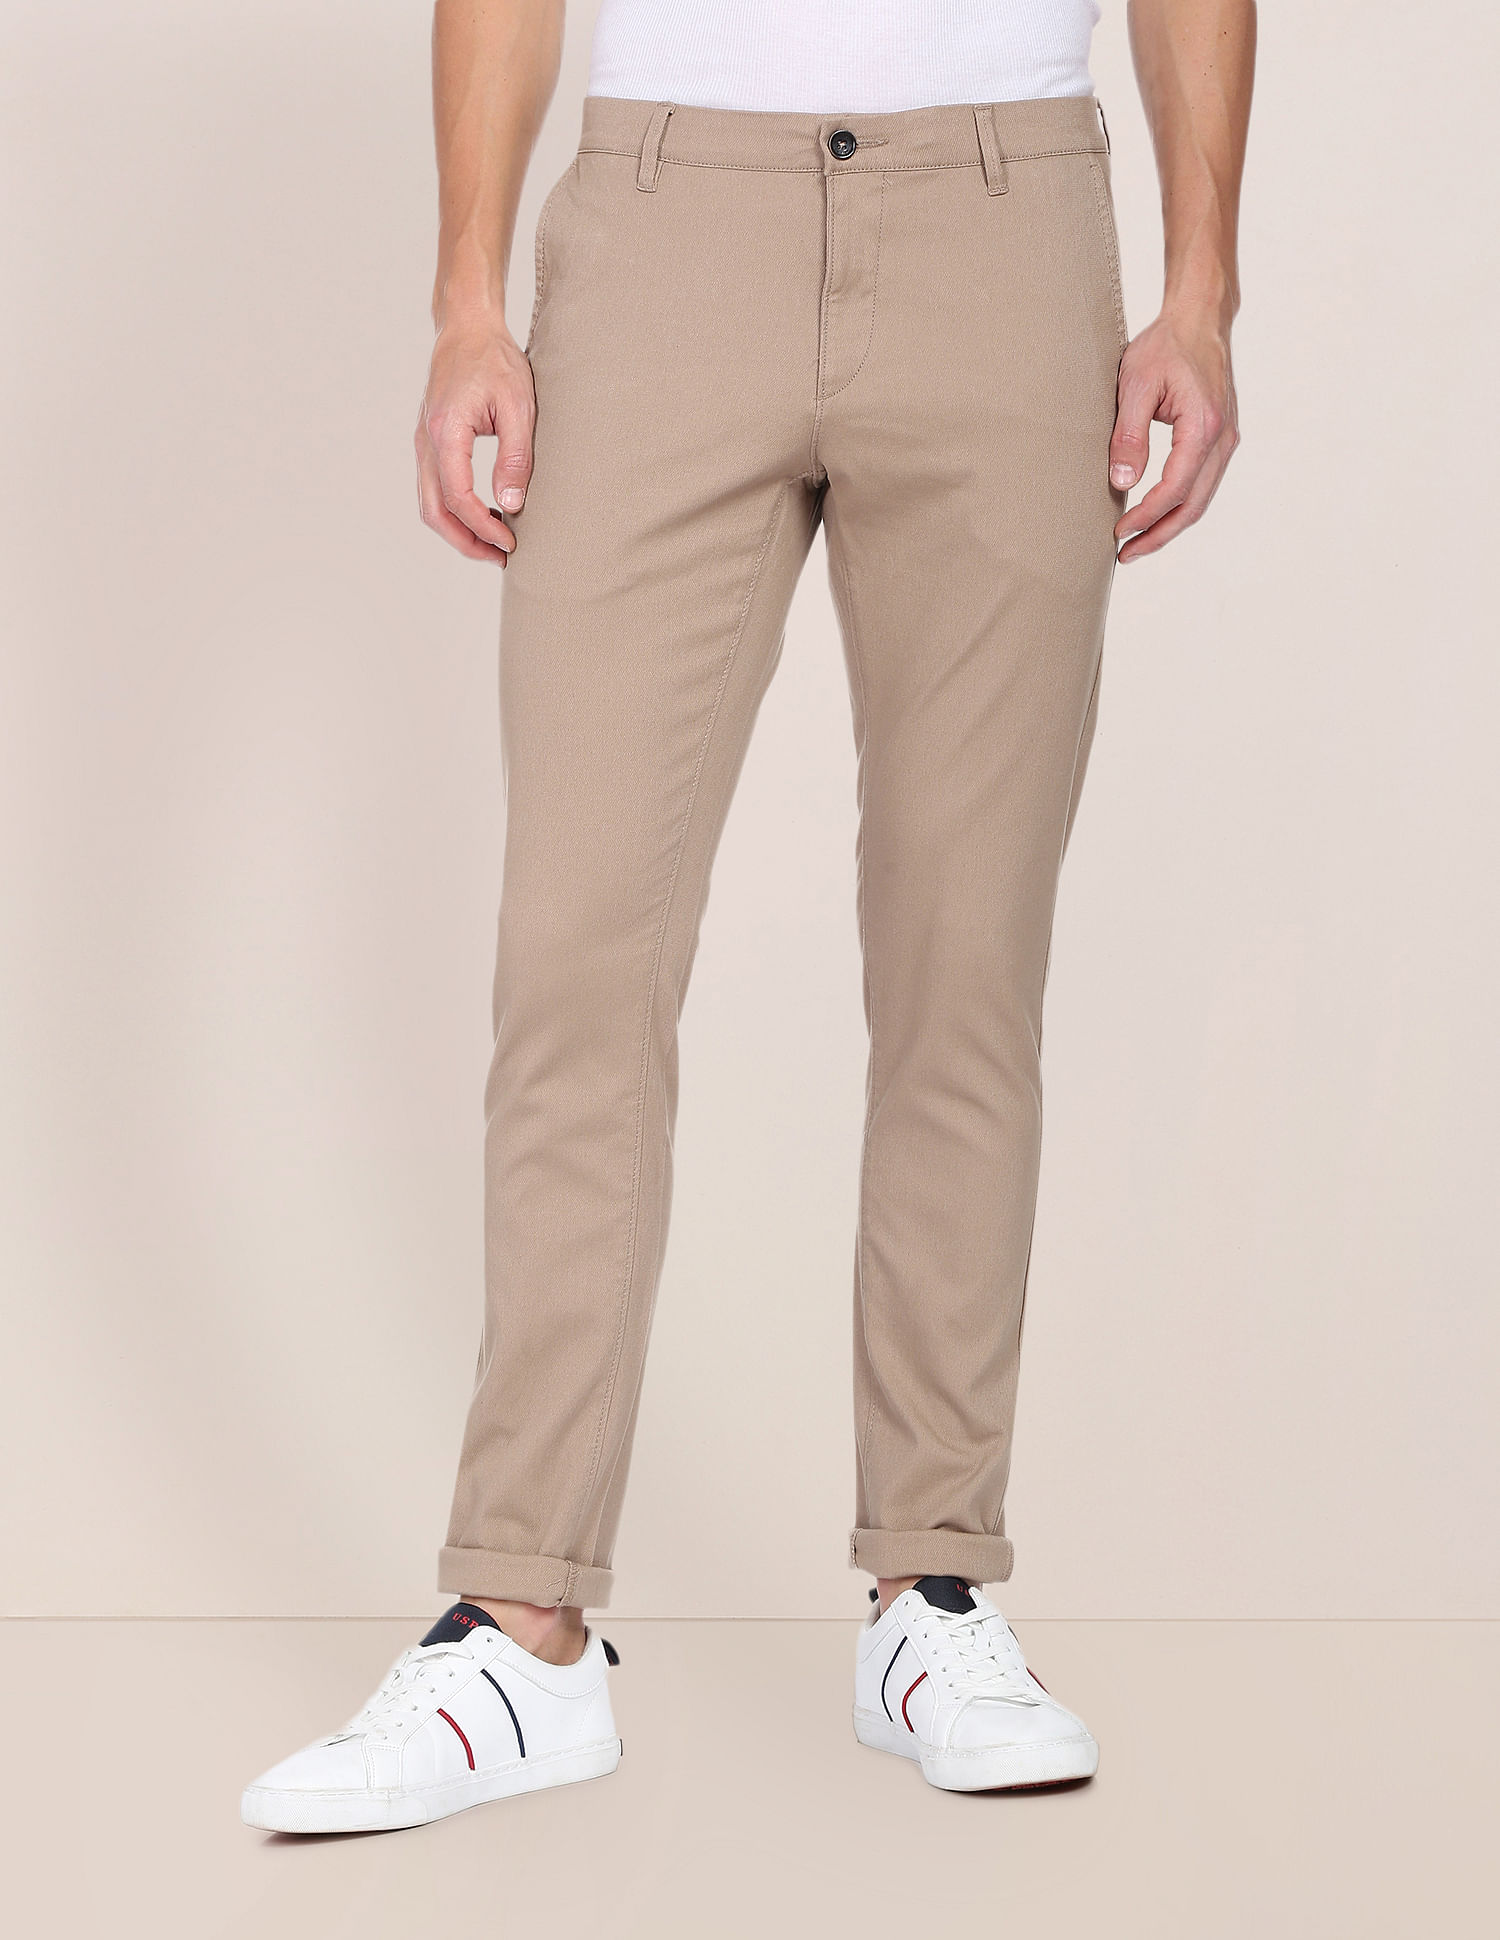 US POLO ASSN Casual Trousers  Buy US POLO ASSN Men Khaki Mid Rise  Solid Casual Trouser Online  Nykaa Fashion